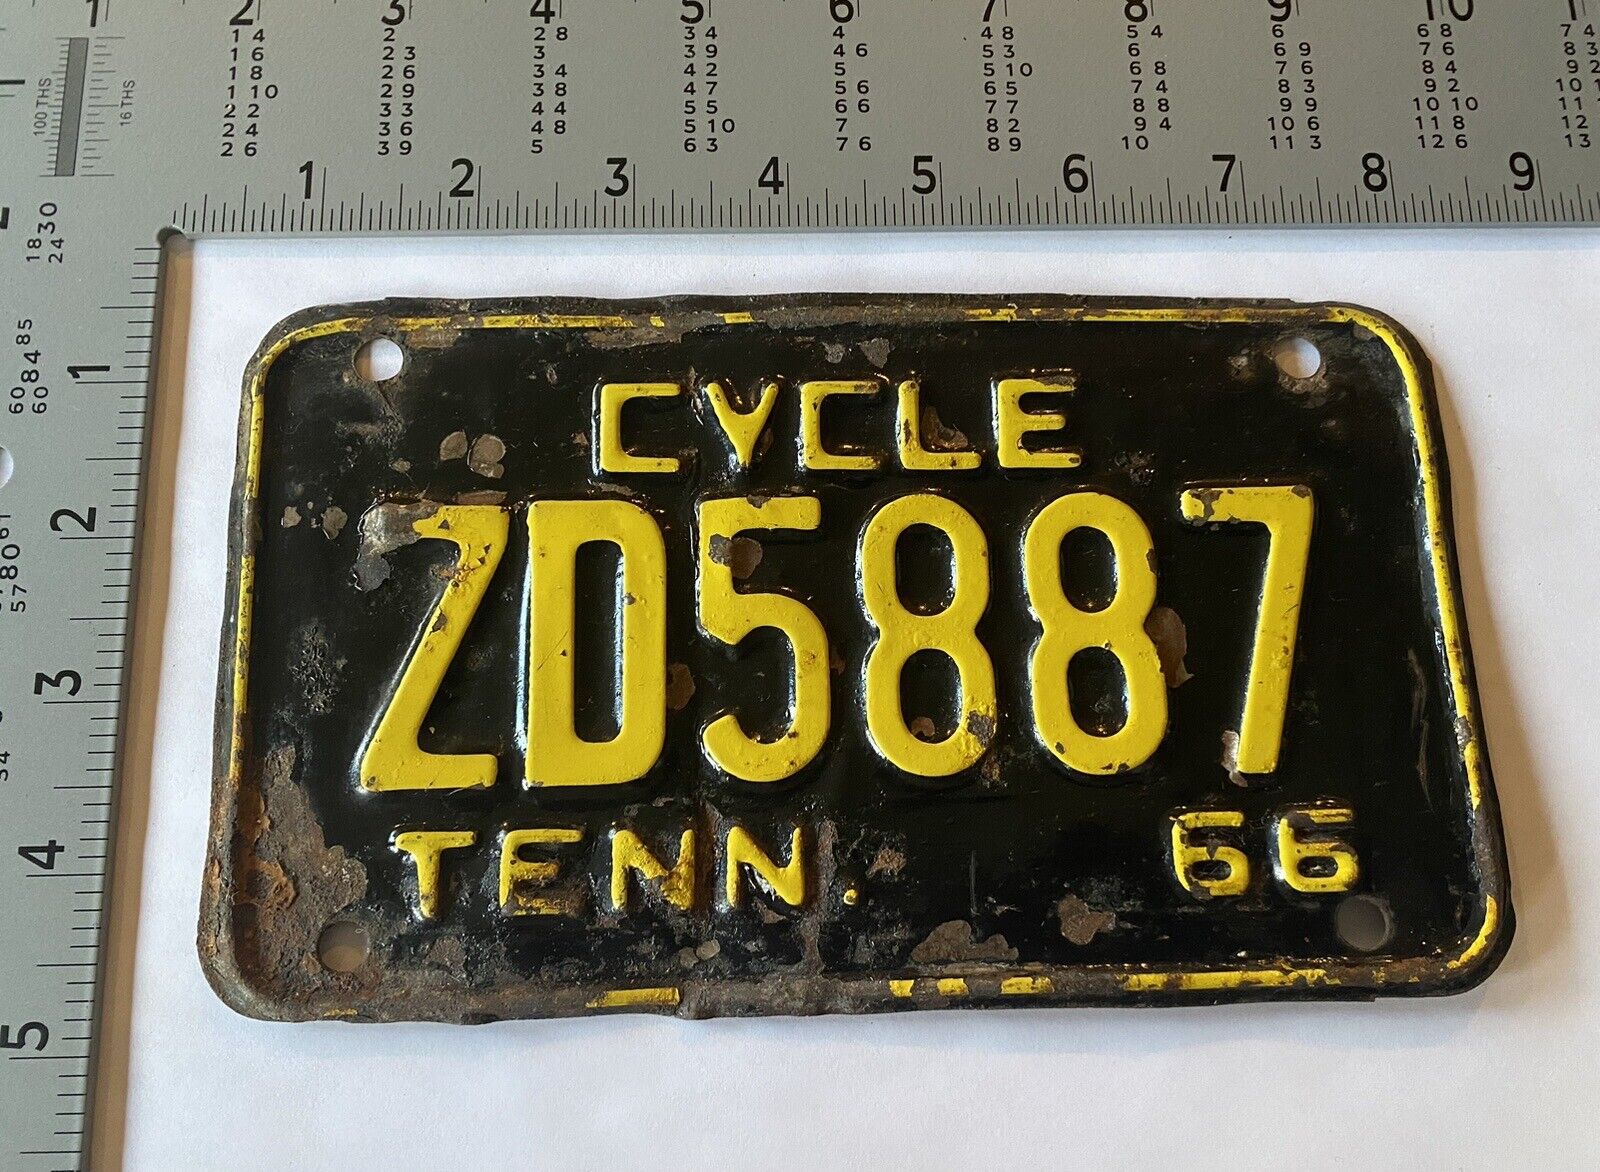 1966 Tennessee MOTORCYCLE License Plate ALPCA Harley Davidson Indian ZD5887